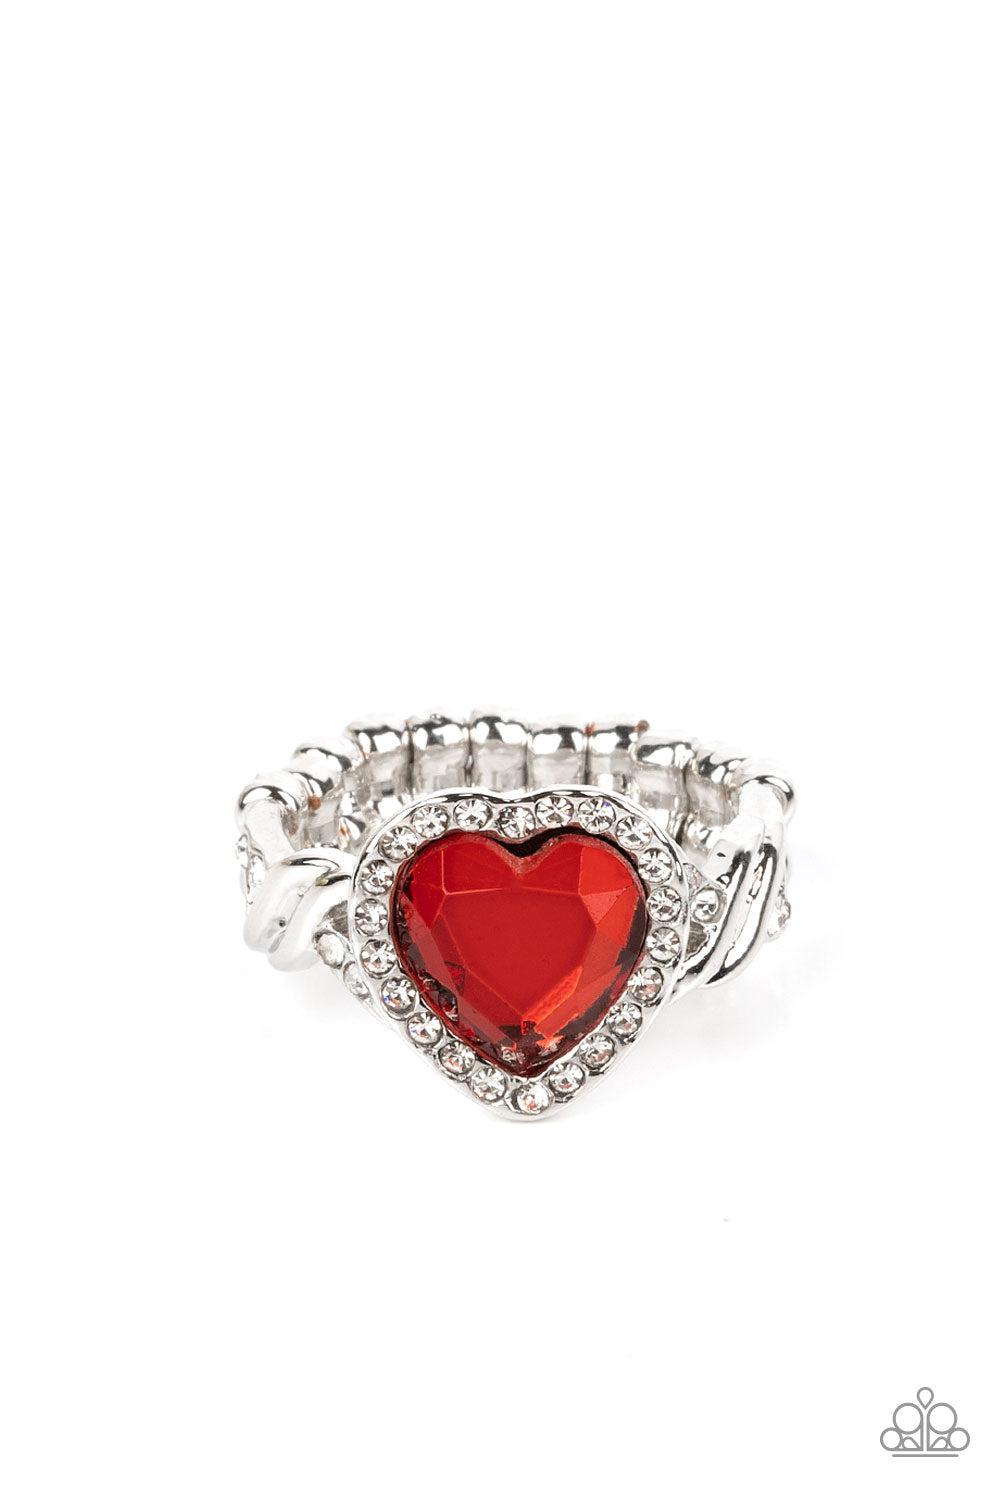 Committed to Cupid Red Rhinestone Heart Ring - Paparazzi Accessories- lightbox - CarasShop.com - $5 Jewelry by Cara Jewels